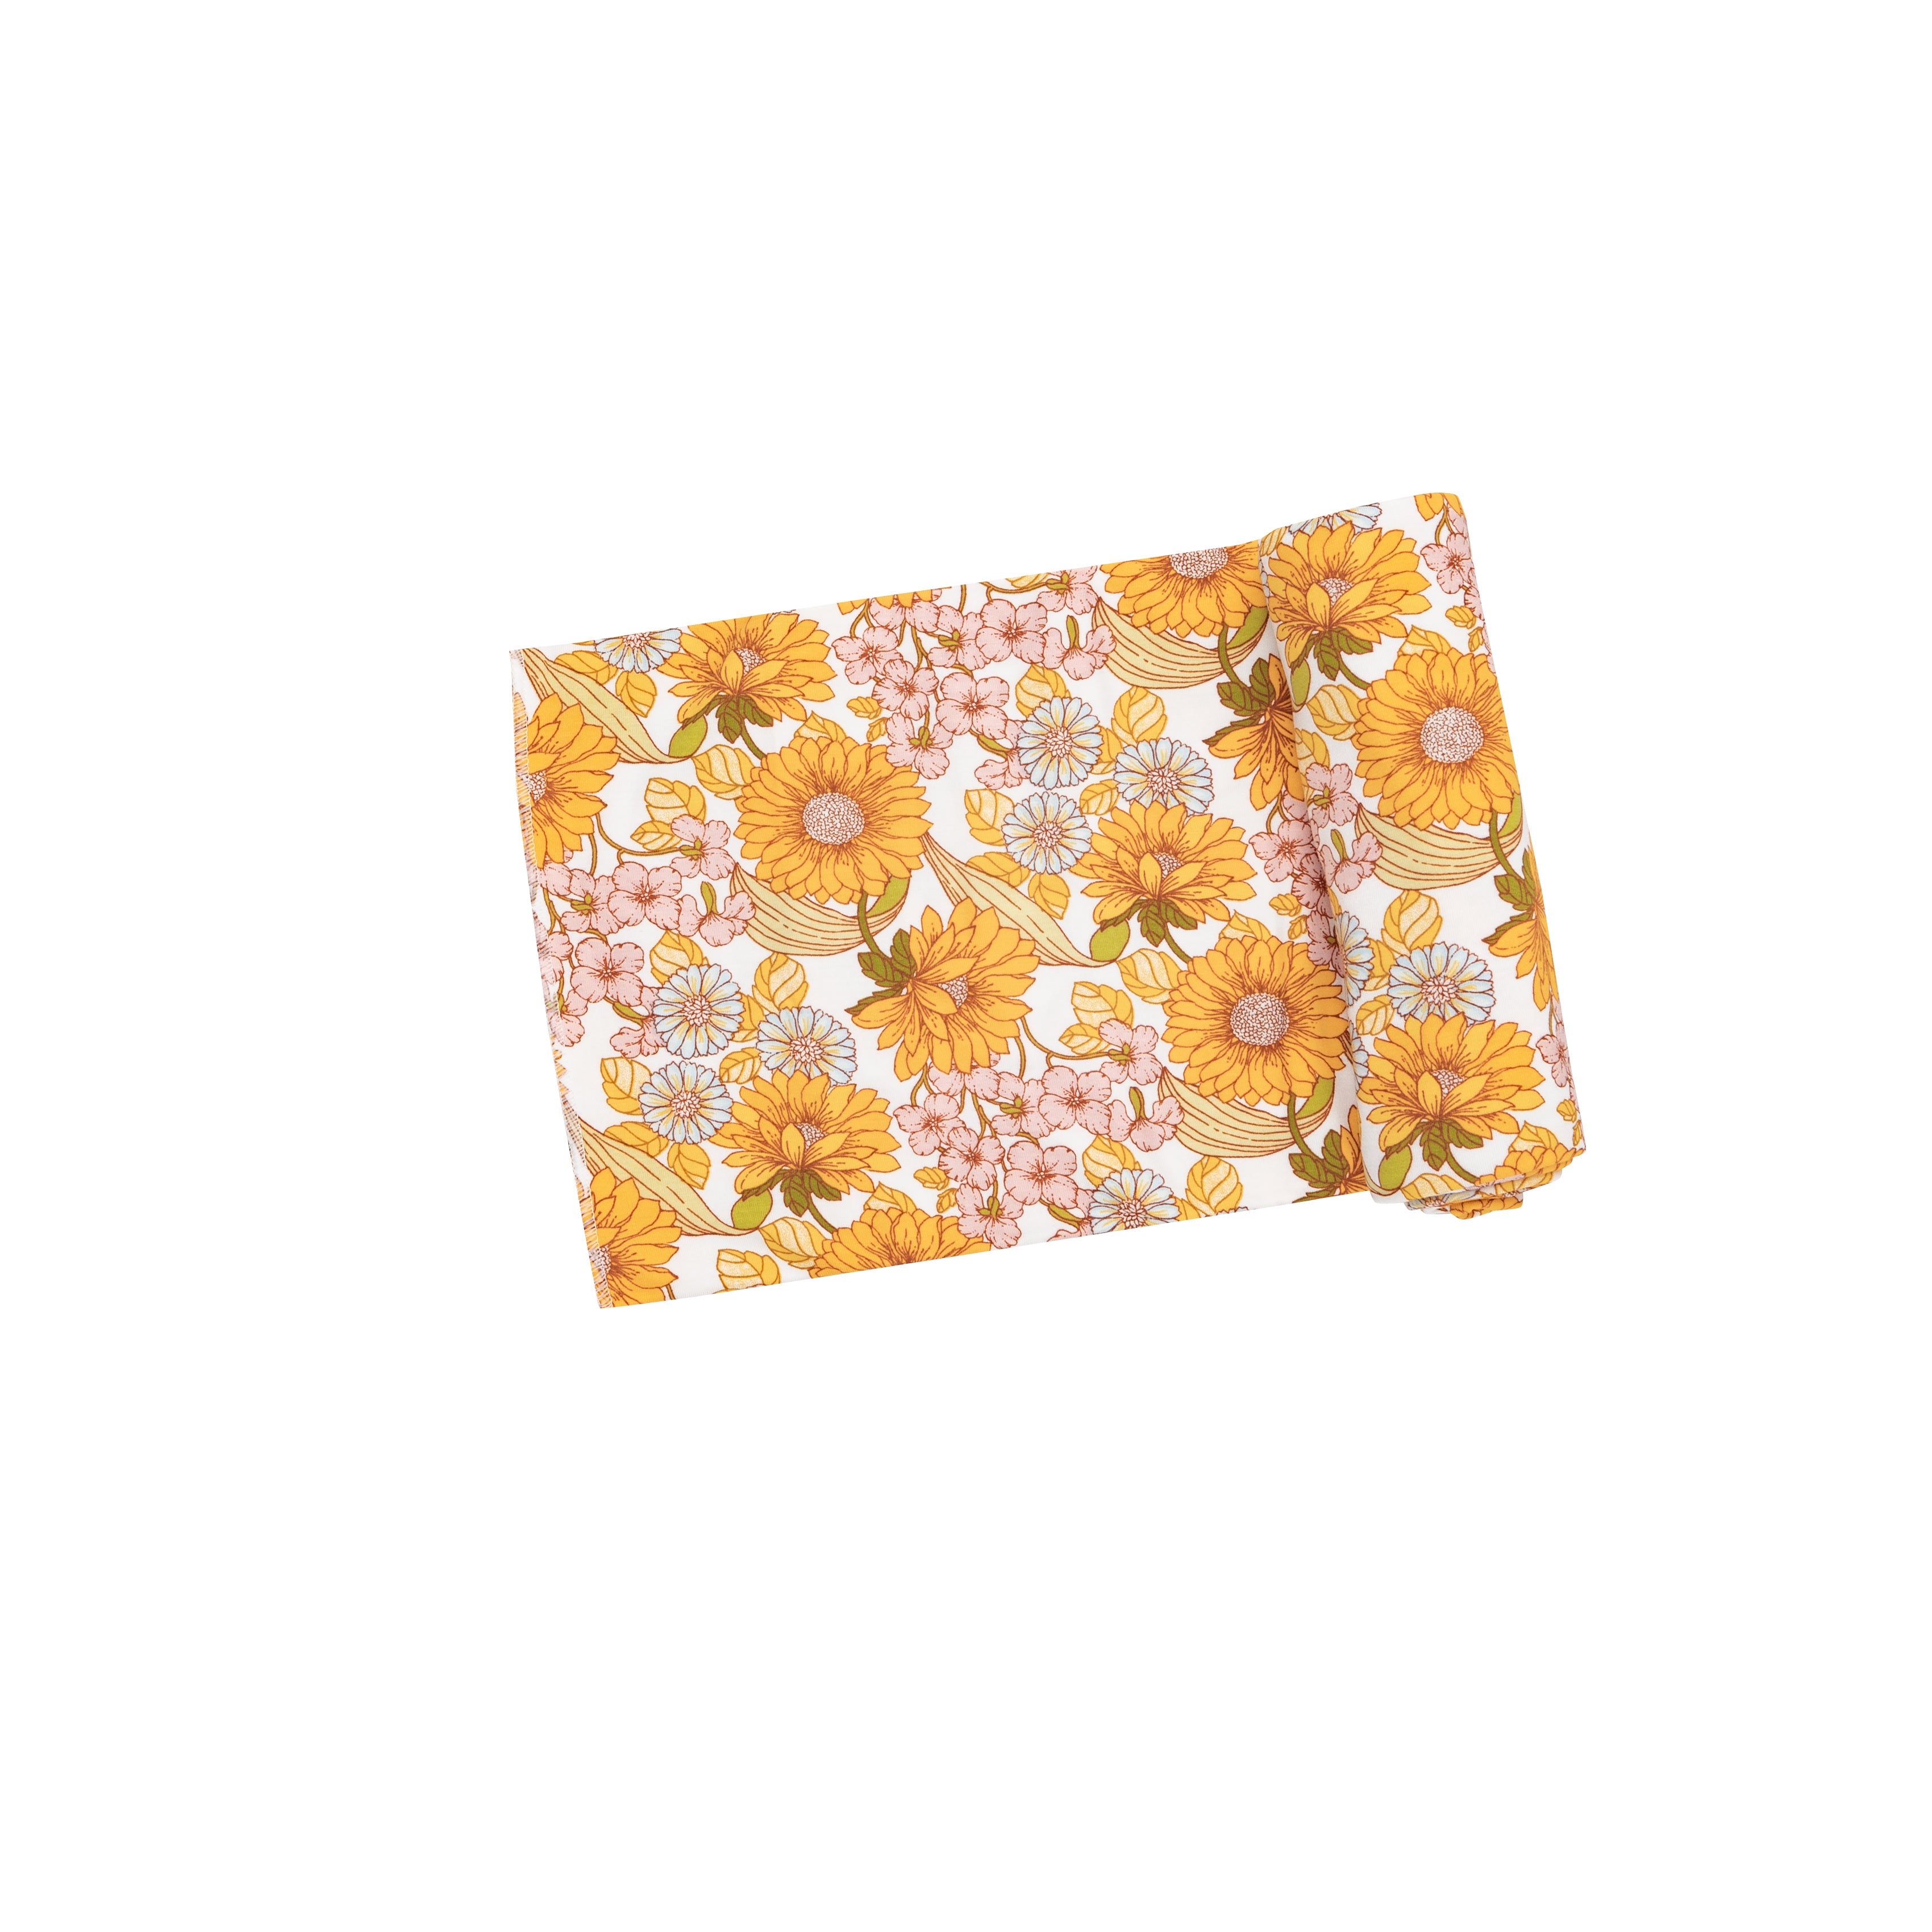 Bamboo Swaddle Blanket - Sunflower Dream Floral